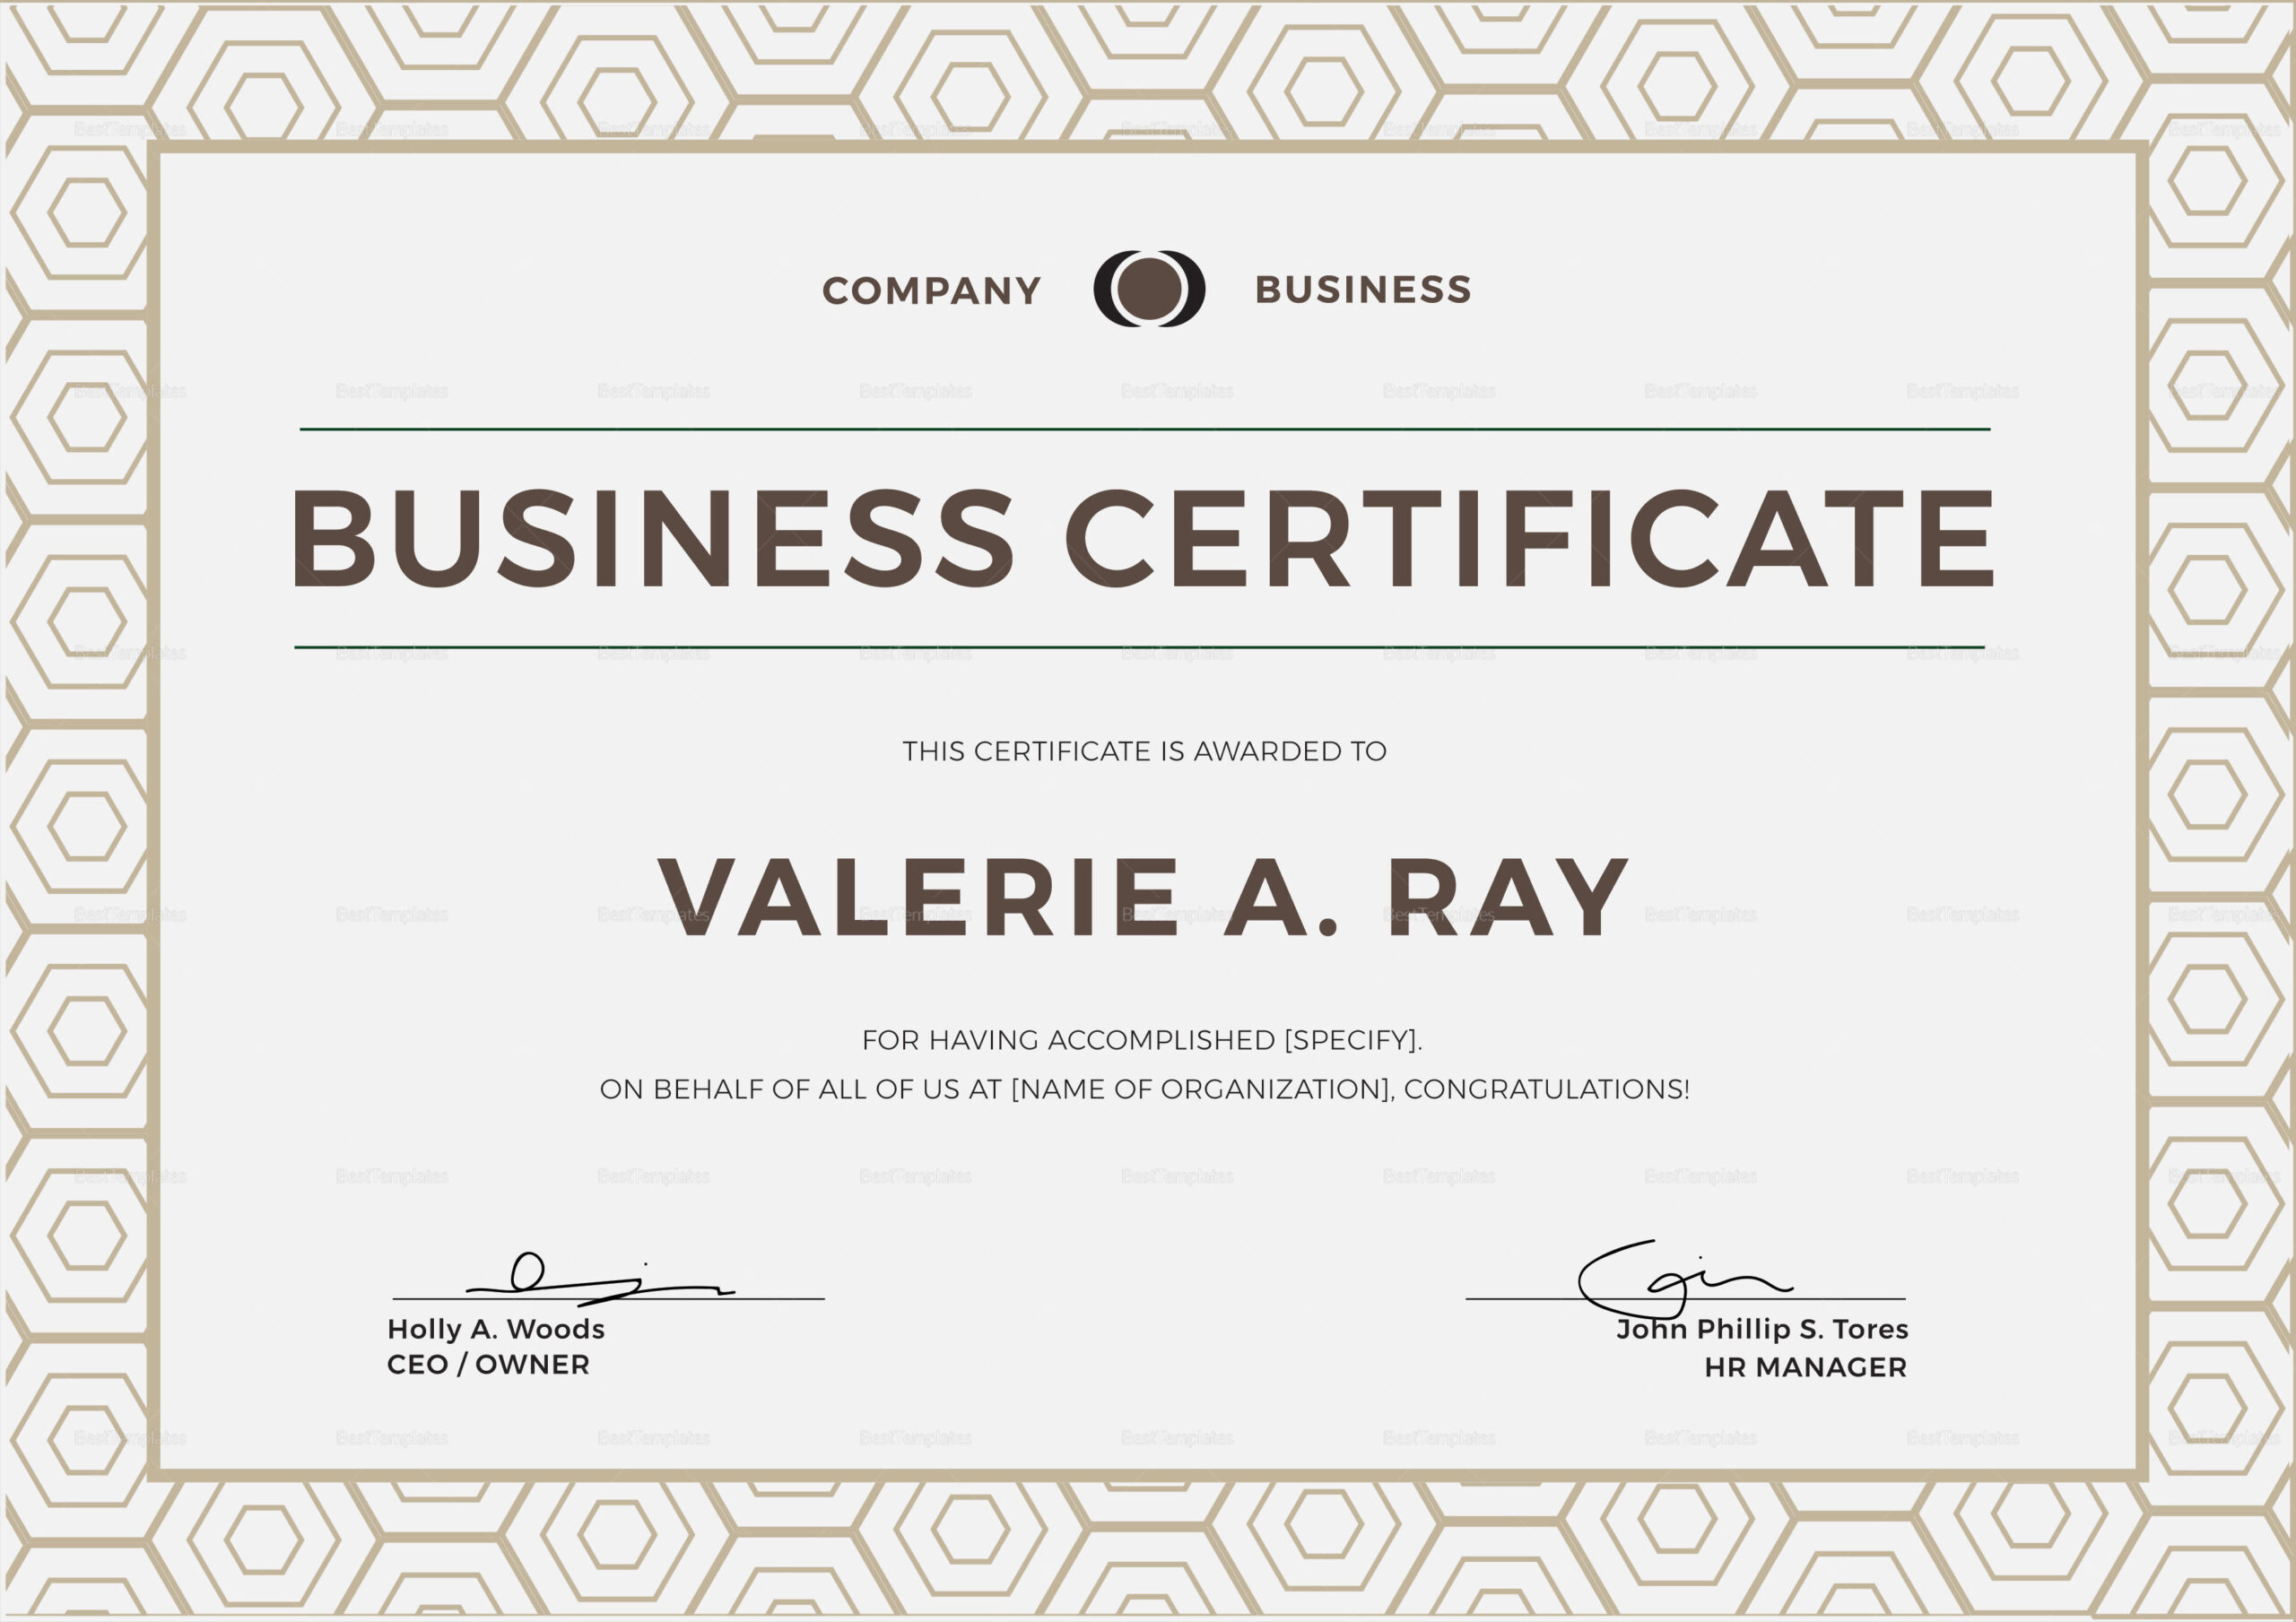 Business Certificate Sample Calep.midnightpig.co In Amazing Certificate Of Ownership Template